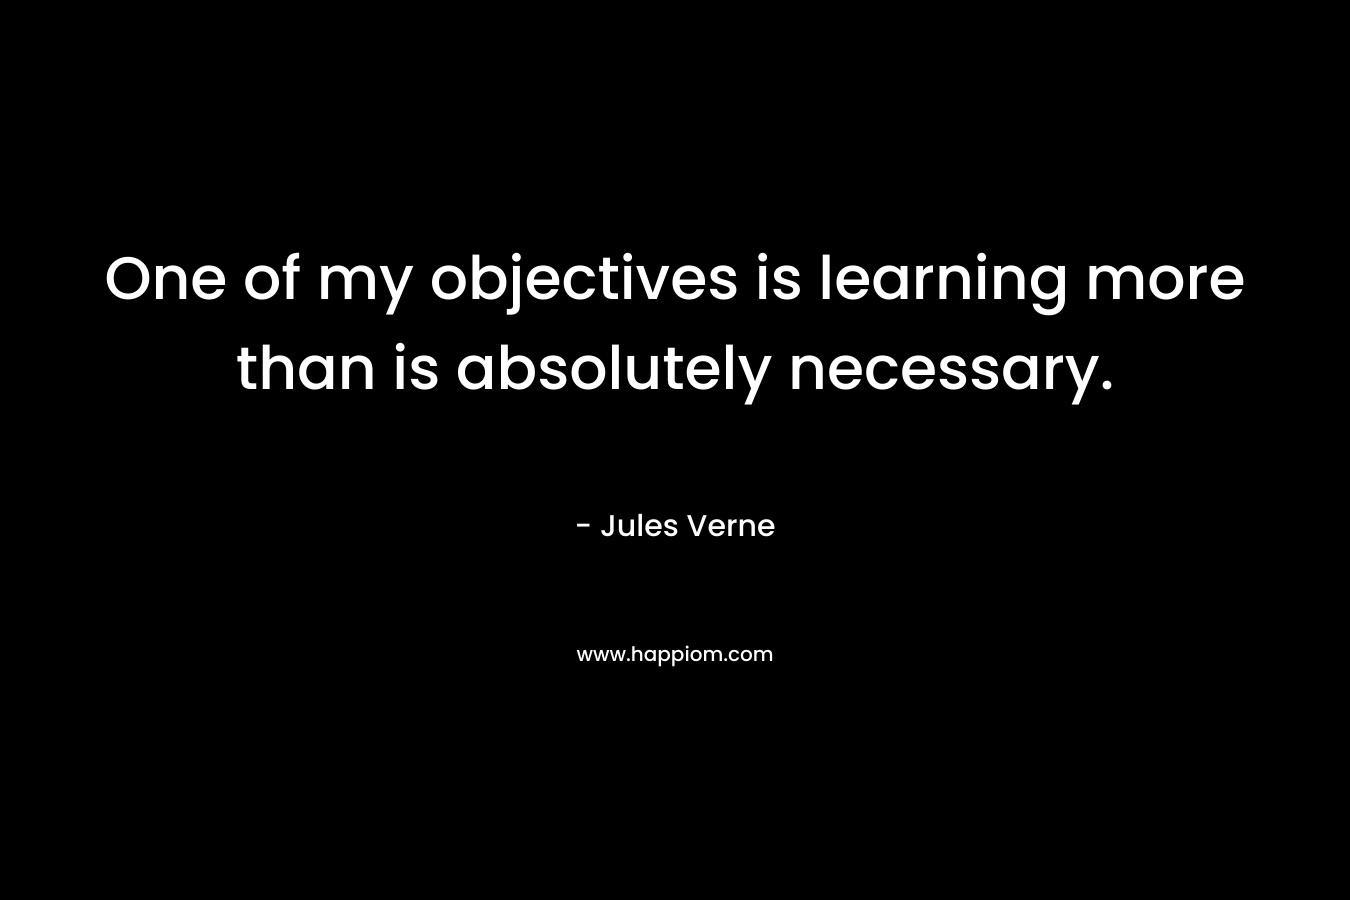 One of my objectives is learning more than is absolutely necessary. – Jules Verne